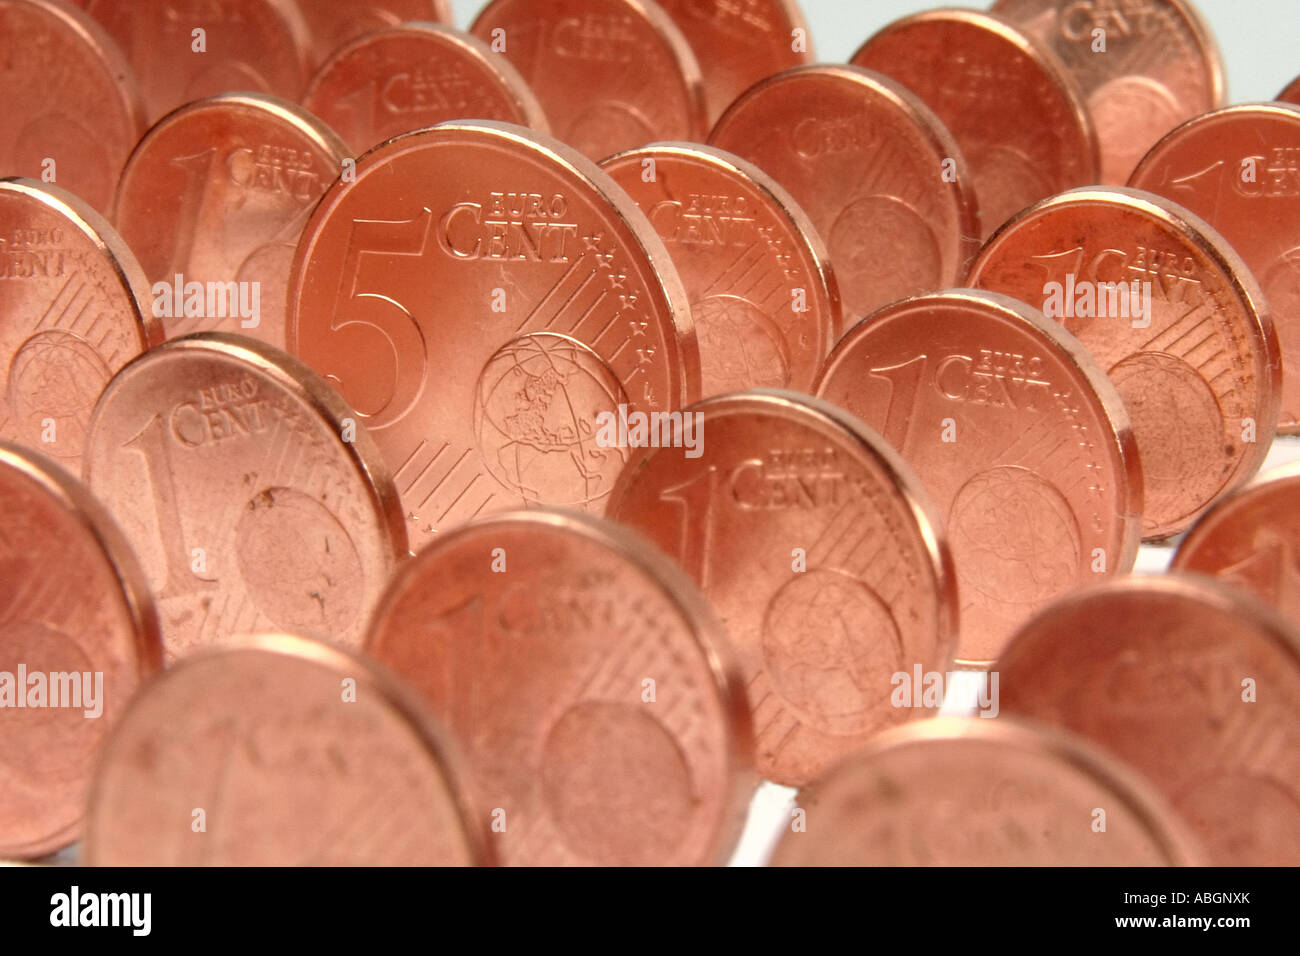 Cent coins in a row Stock Photo